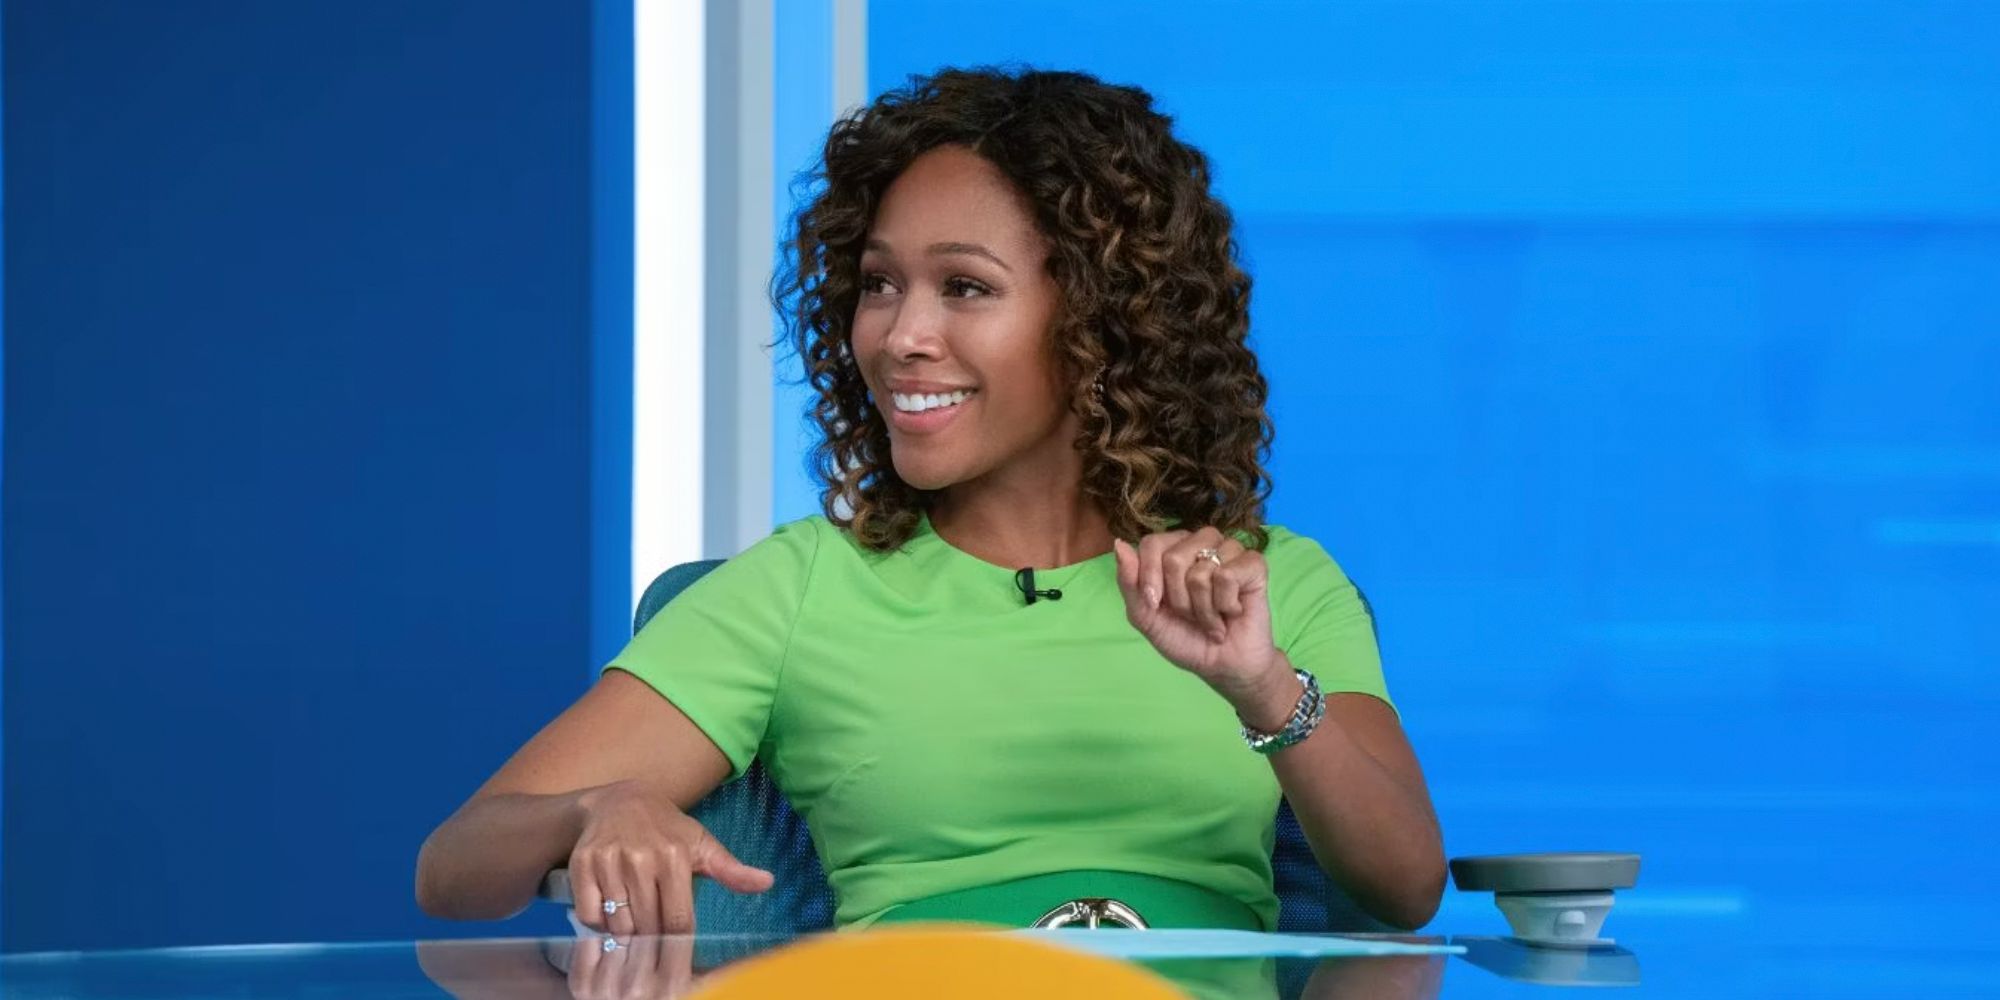 Nicole Beharie as a news anchor in The Morning Show